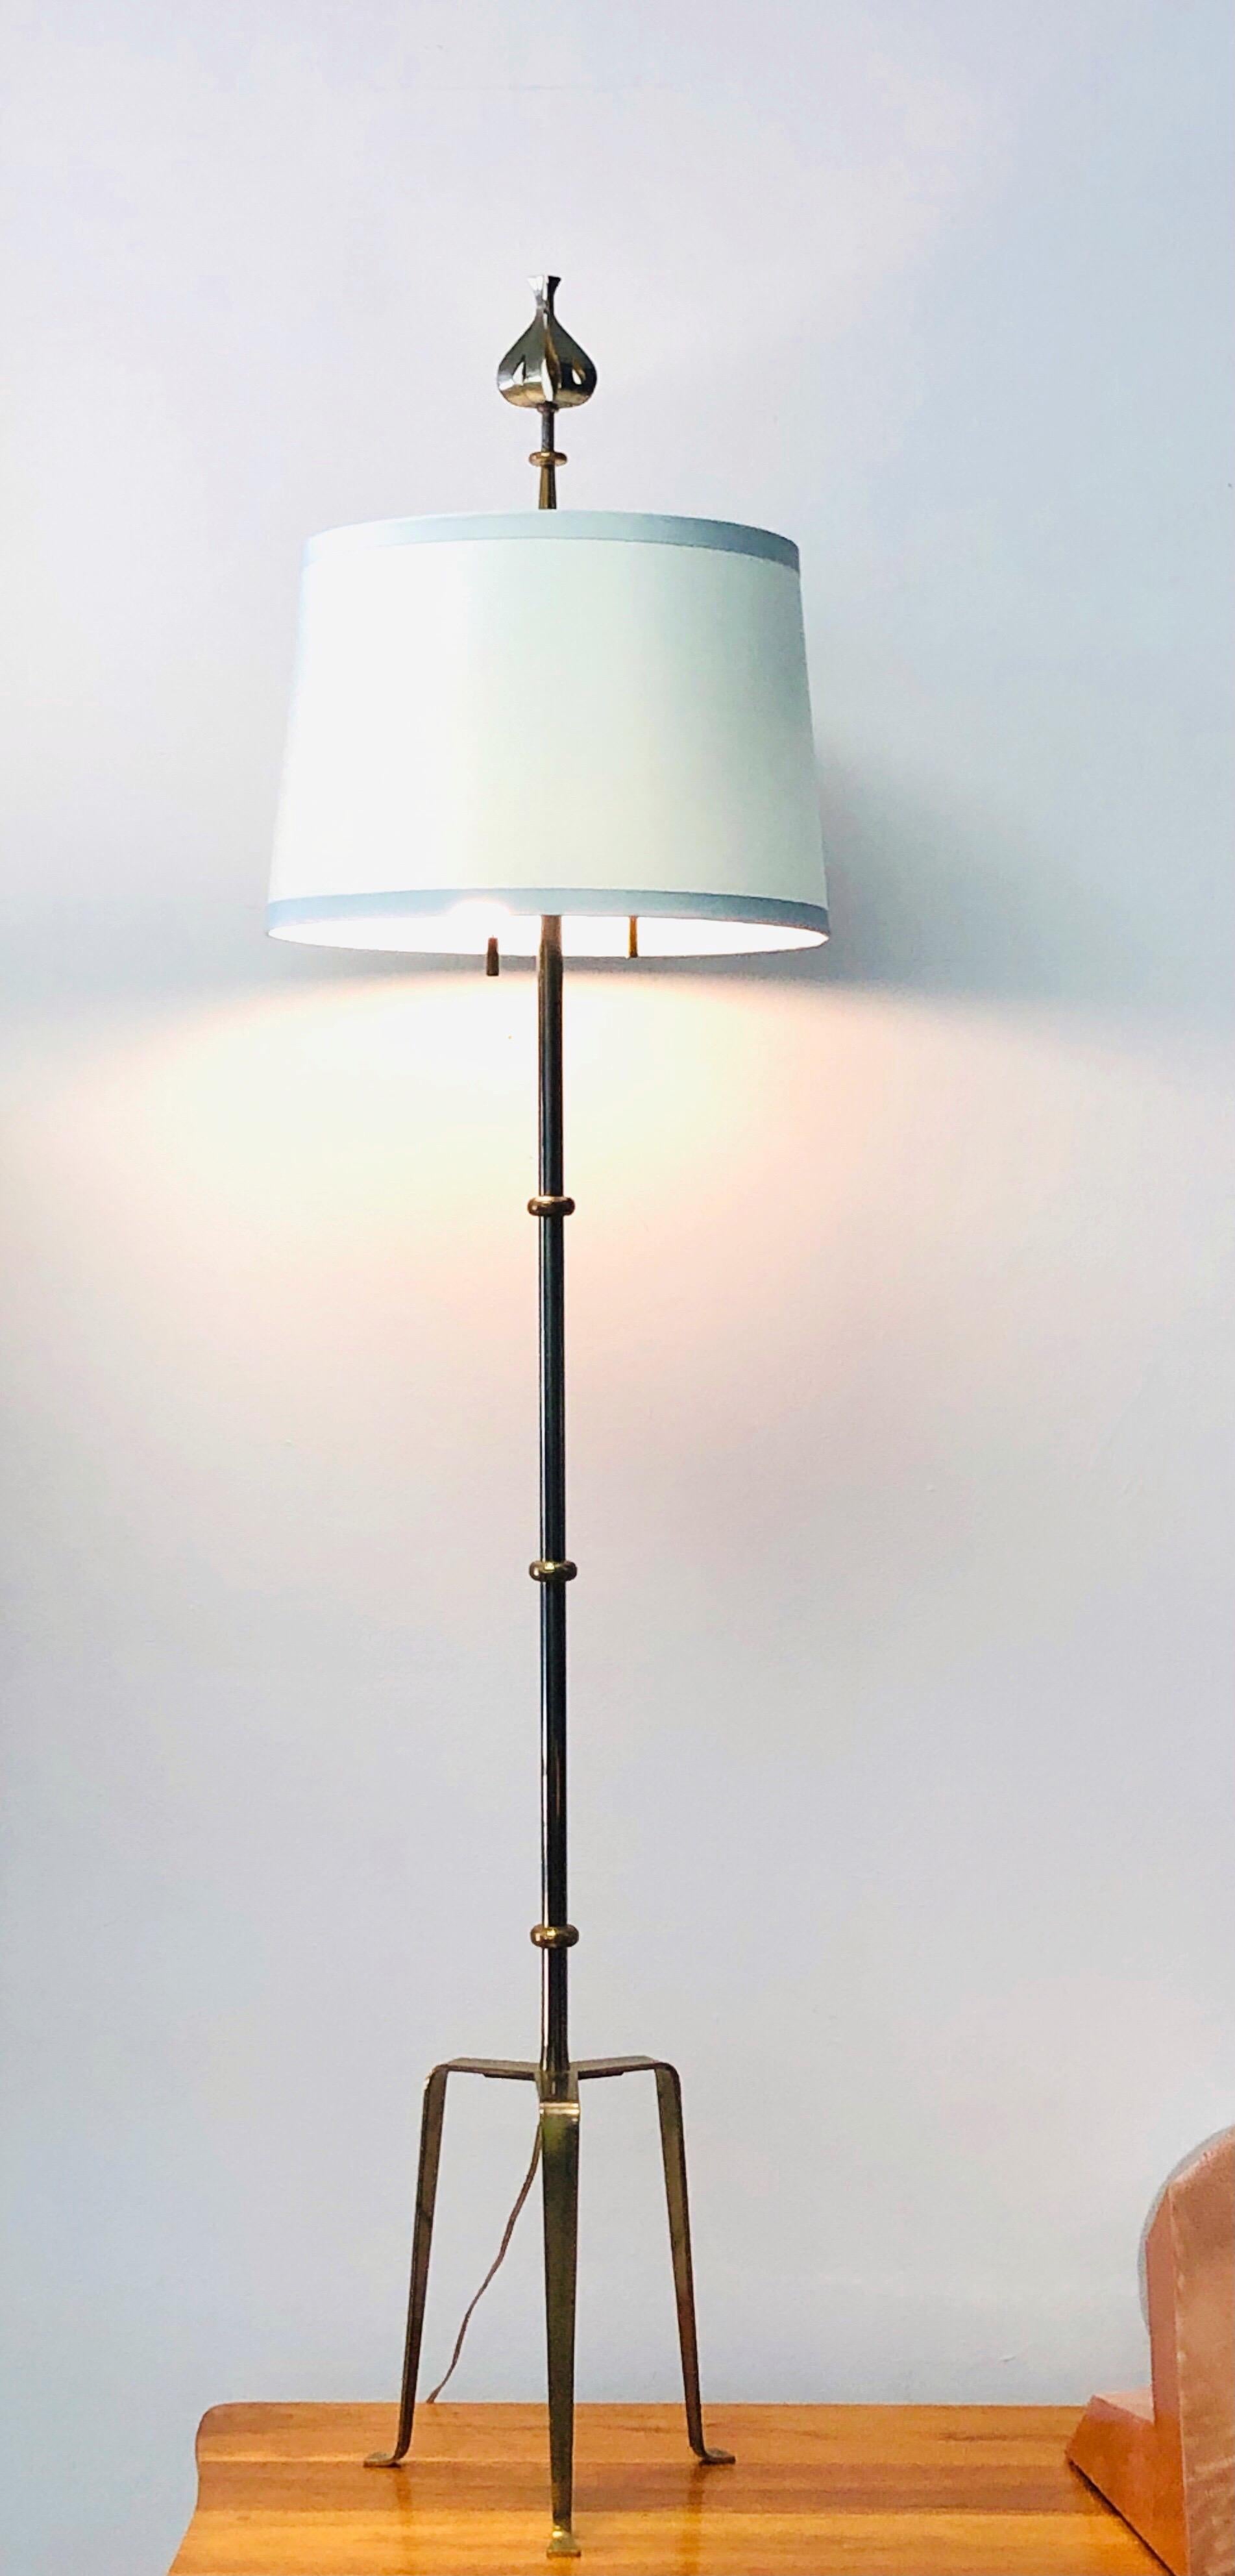 A rare floor lamp by Tommi Parzinger. Slender form on a tripod base and crowned by his most iconic finial.